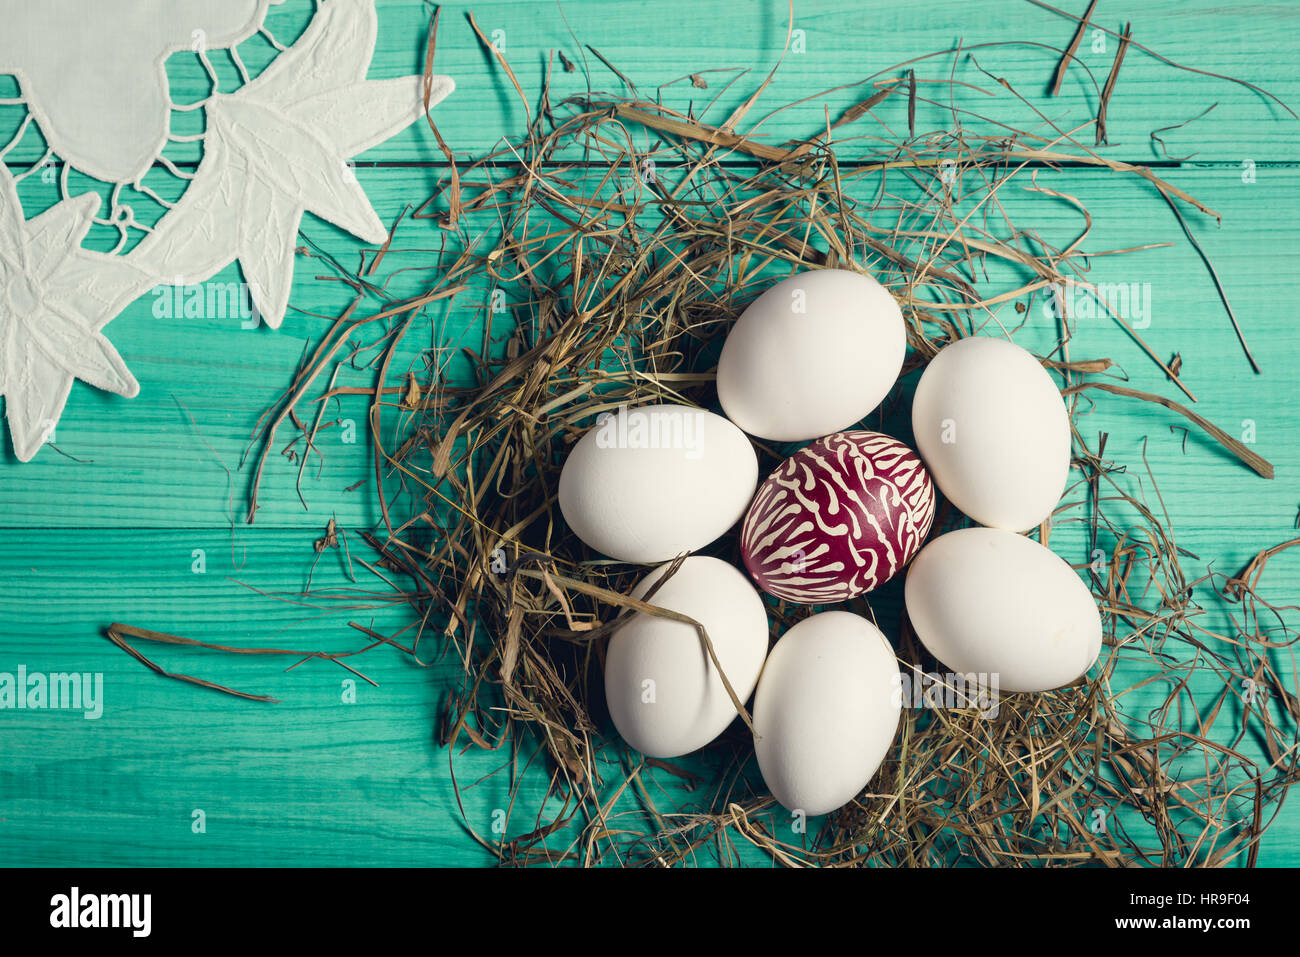 Group of easter eggs on the green wooden surface. Easter concept. Stock Photo